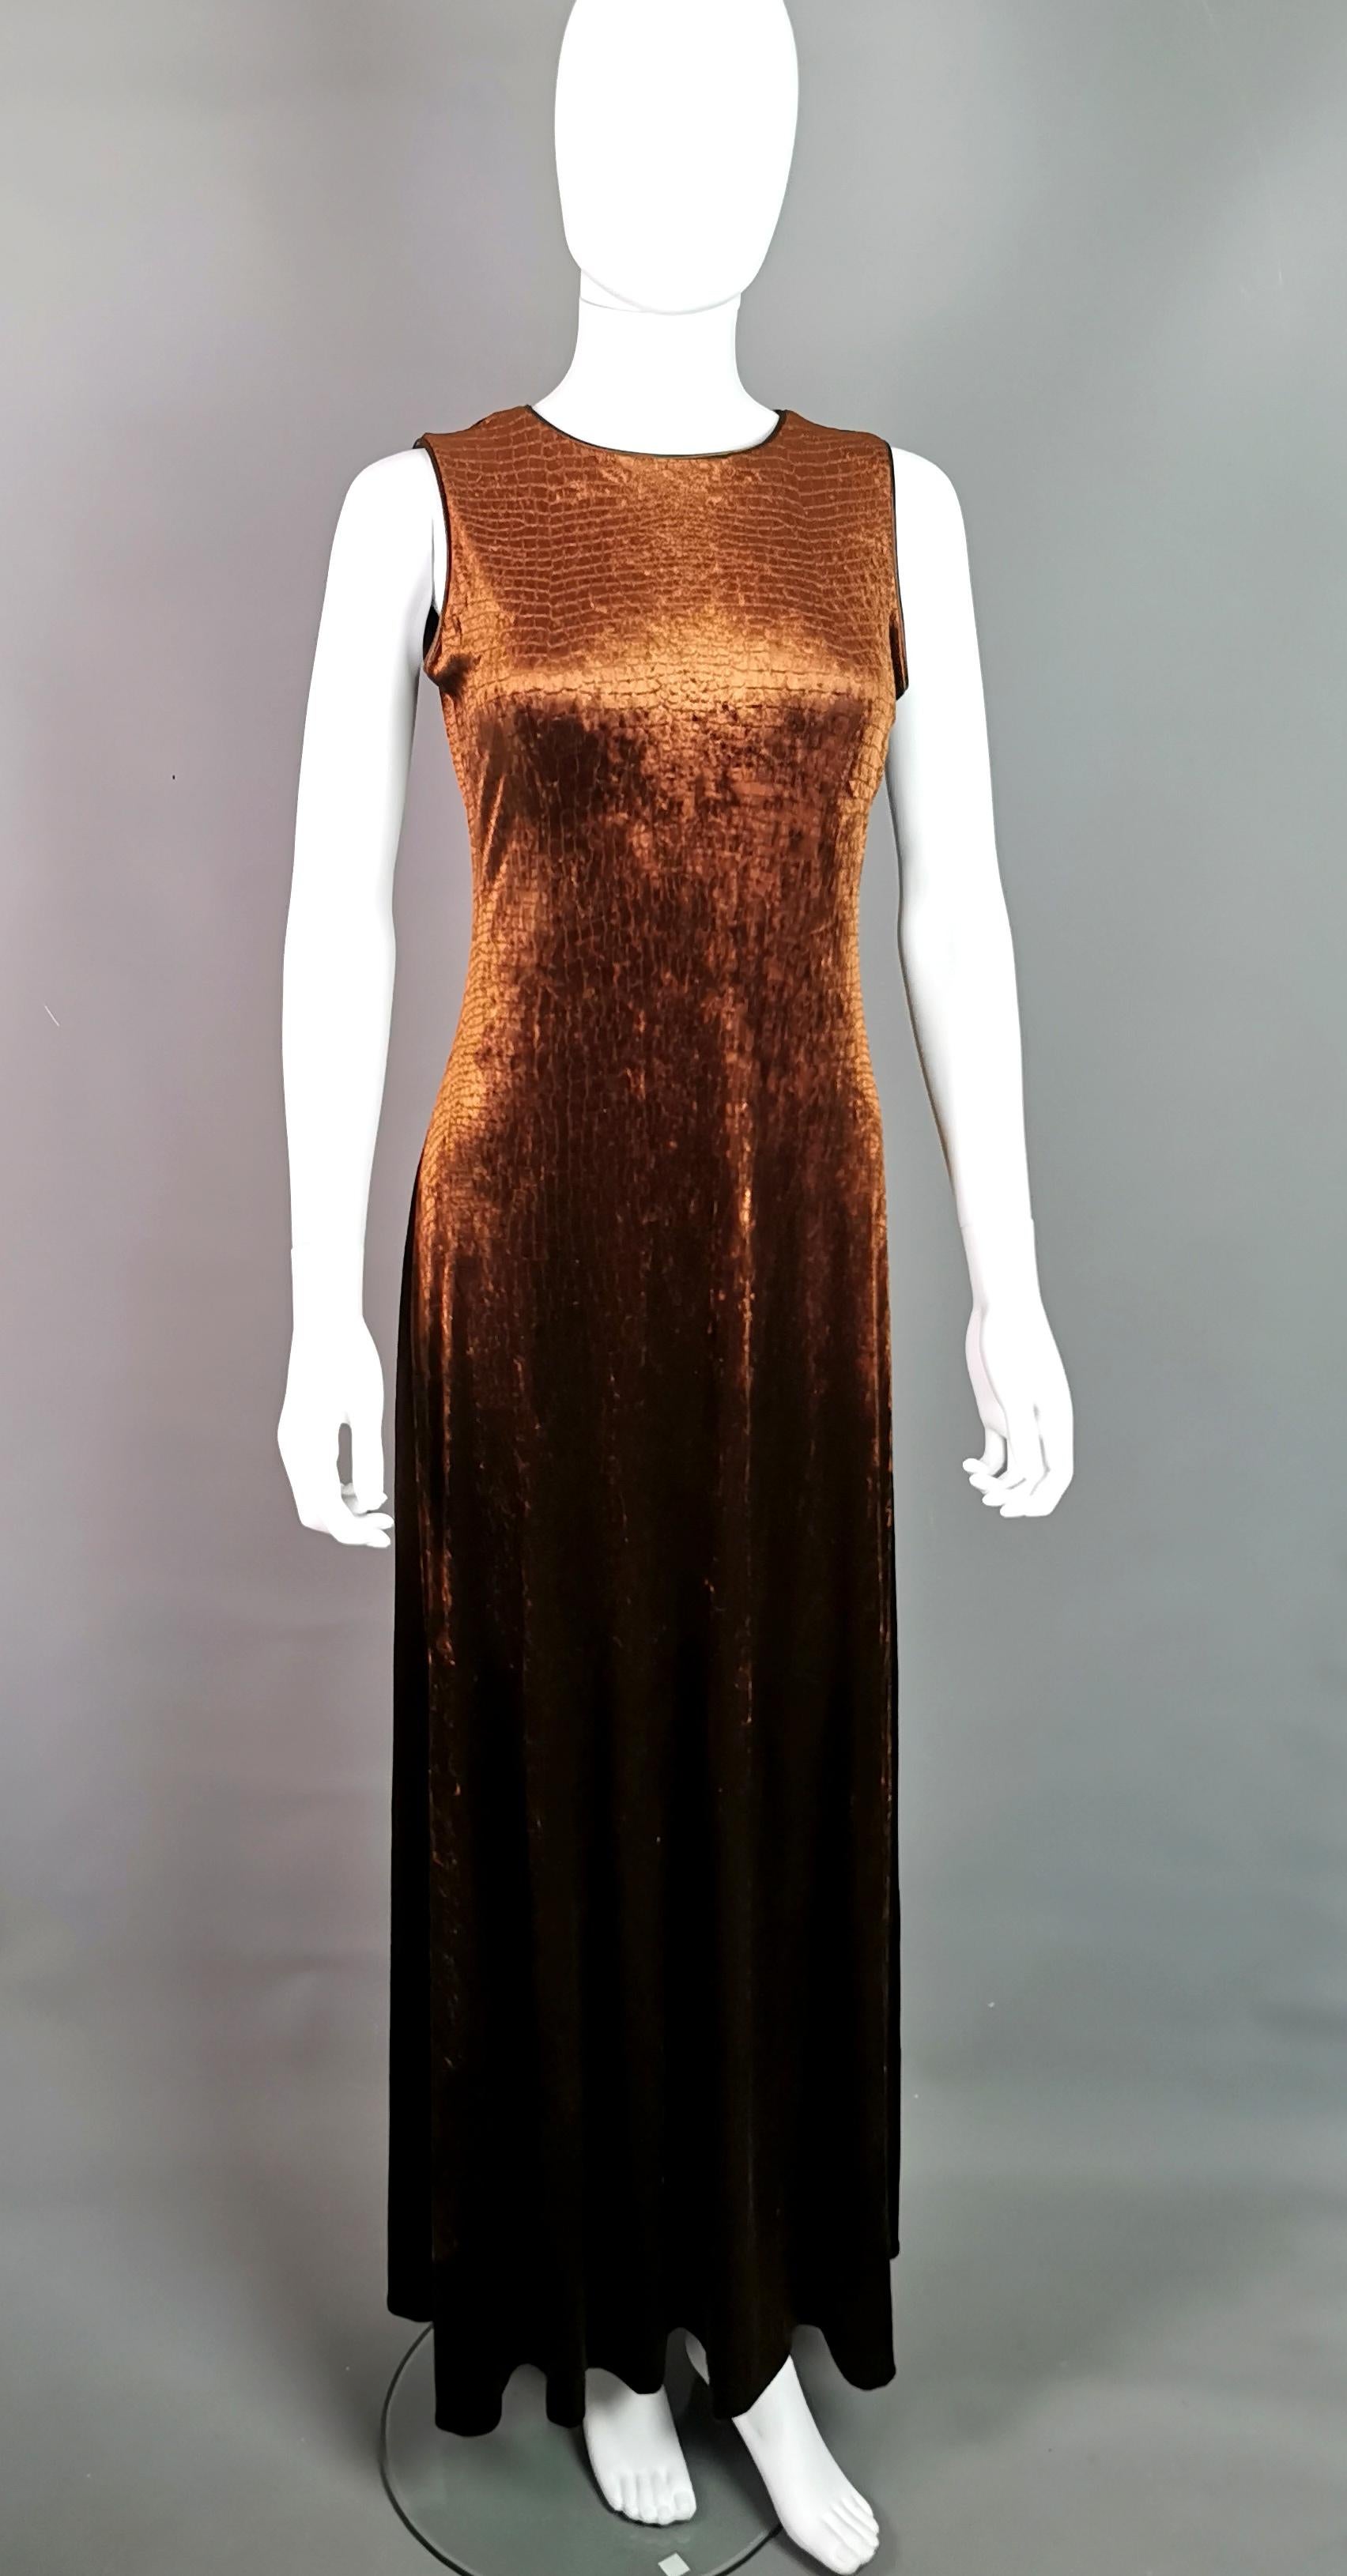 A rare vintage c1990s Huey Waltzer for Neiman Marcus maxi dress.

It is a soft synthetic velvet in a mock Croc print in a rich choclate brown colour.

It is a maxi dress and very figure hugging with a fair amount of stretch.

It is sleeveless and